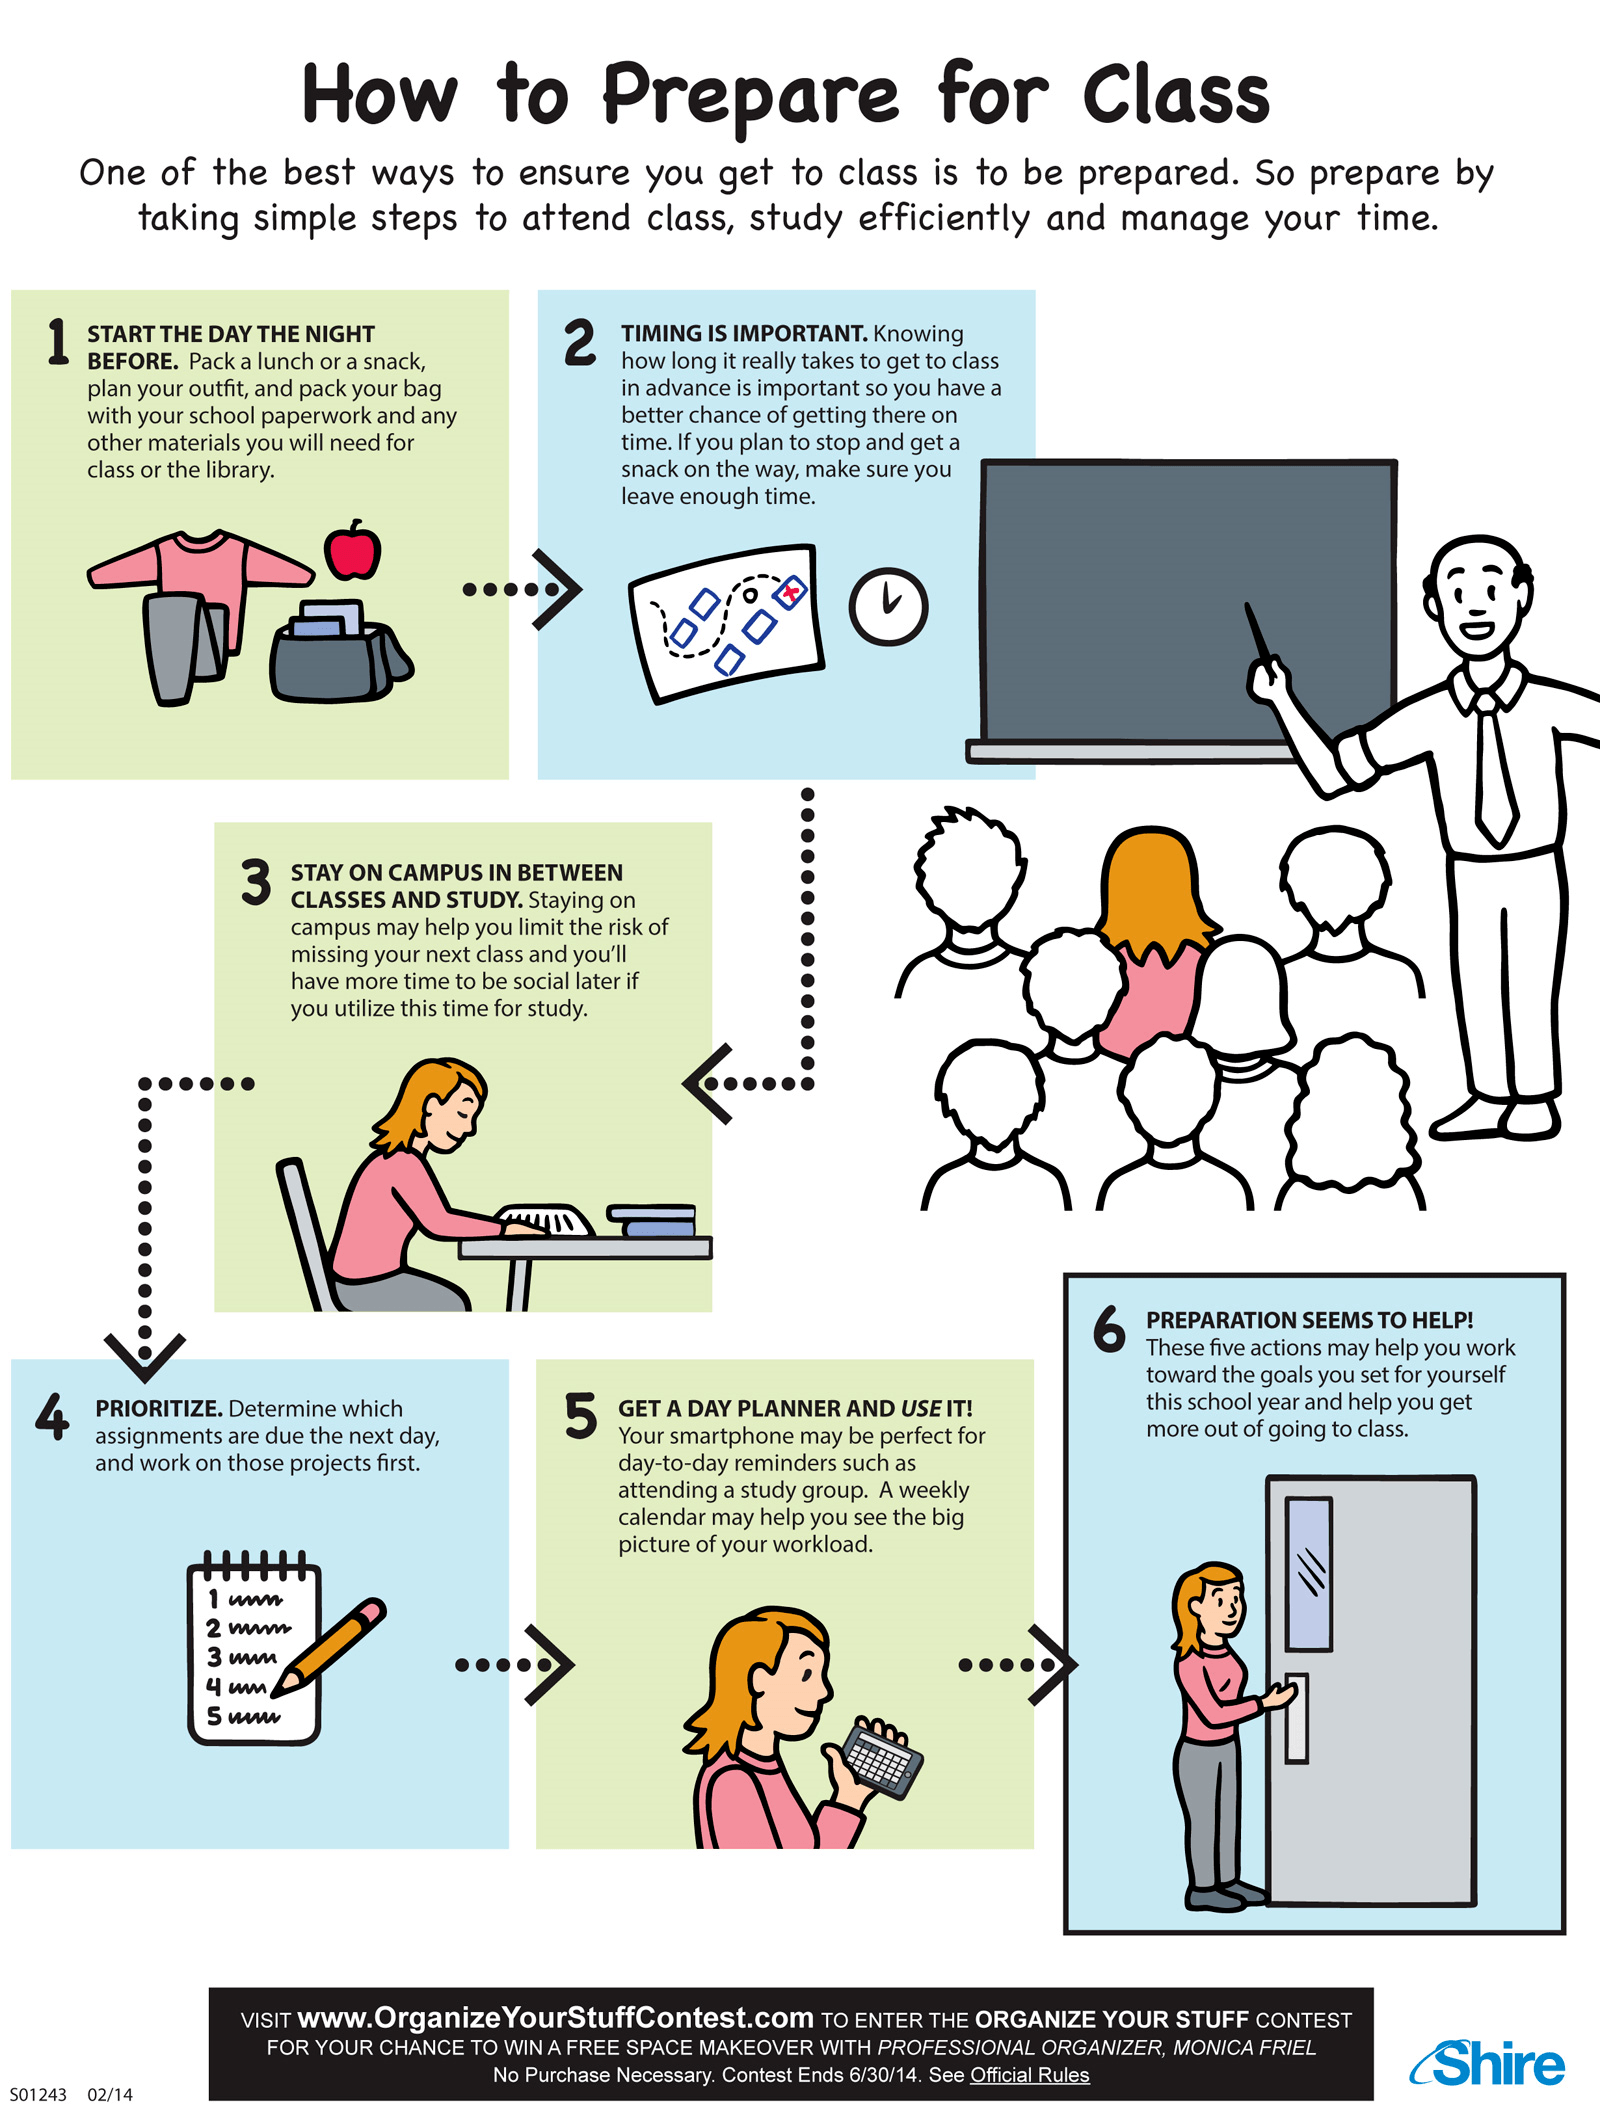 How To Prepare For Class Infographic